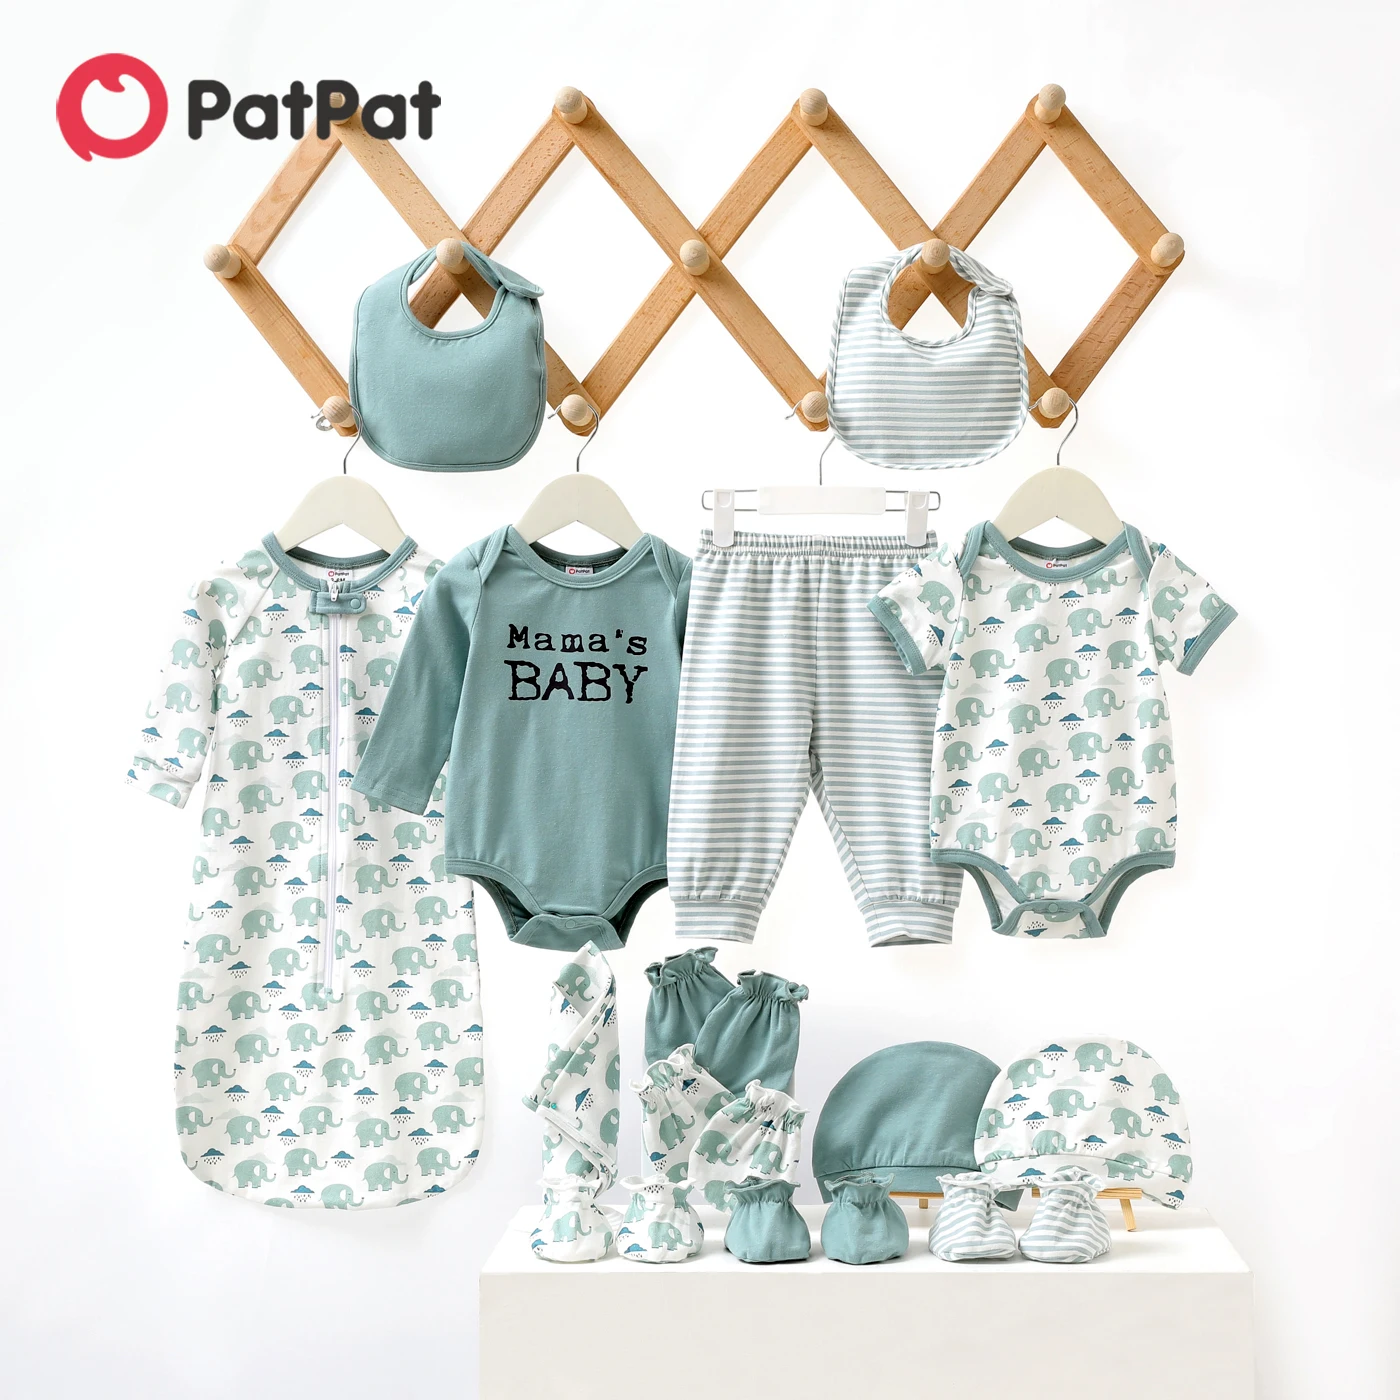 patpat-15pcs-newborn-baby-gifts-newborn-essentials-baby-clothes-0-6-months-baby-outfits-layette-gift-set-for-baby-boys-or-girls